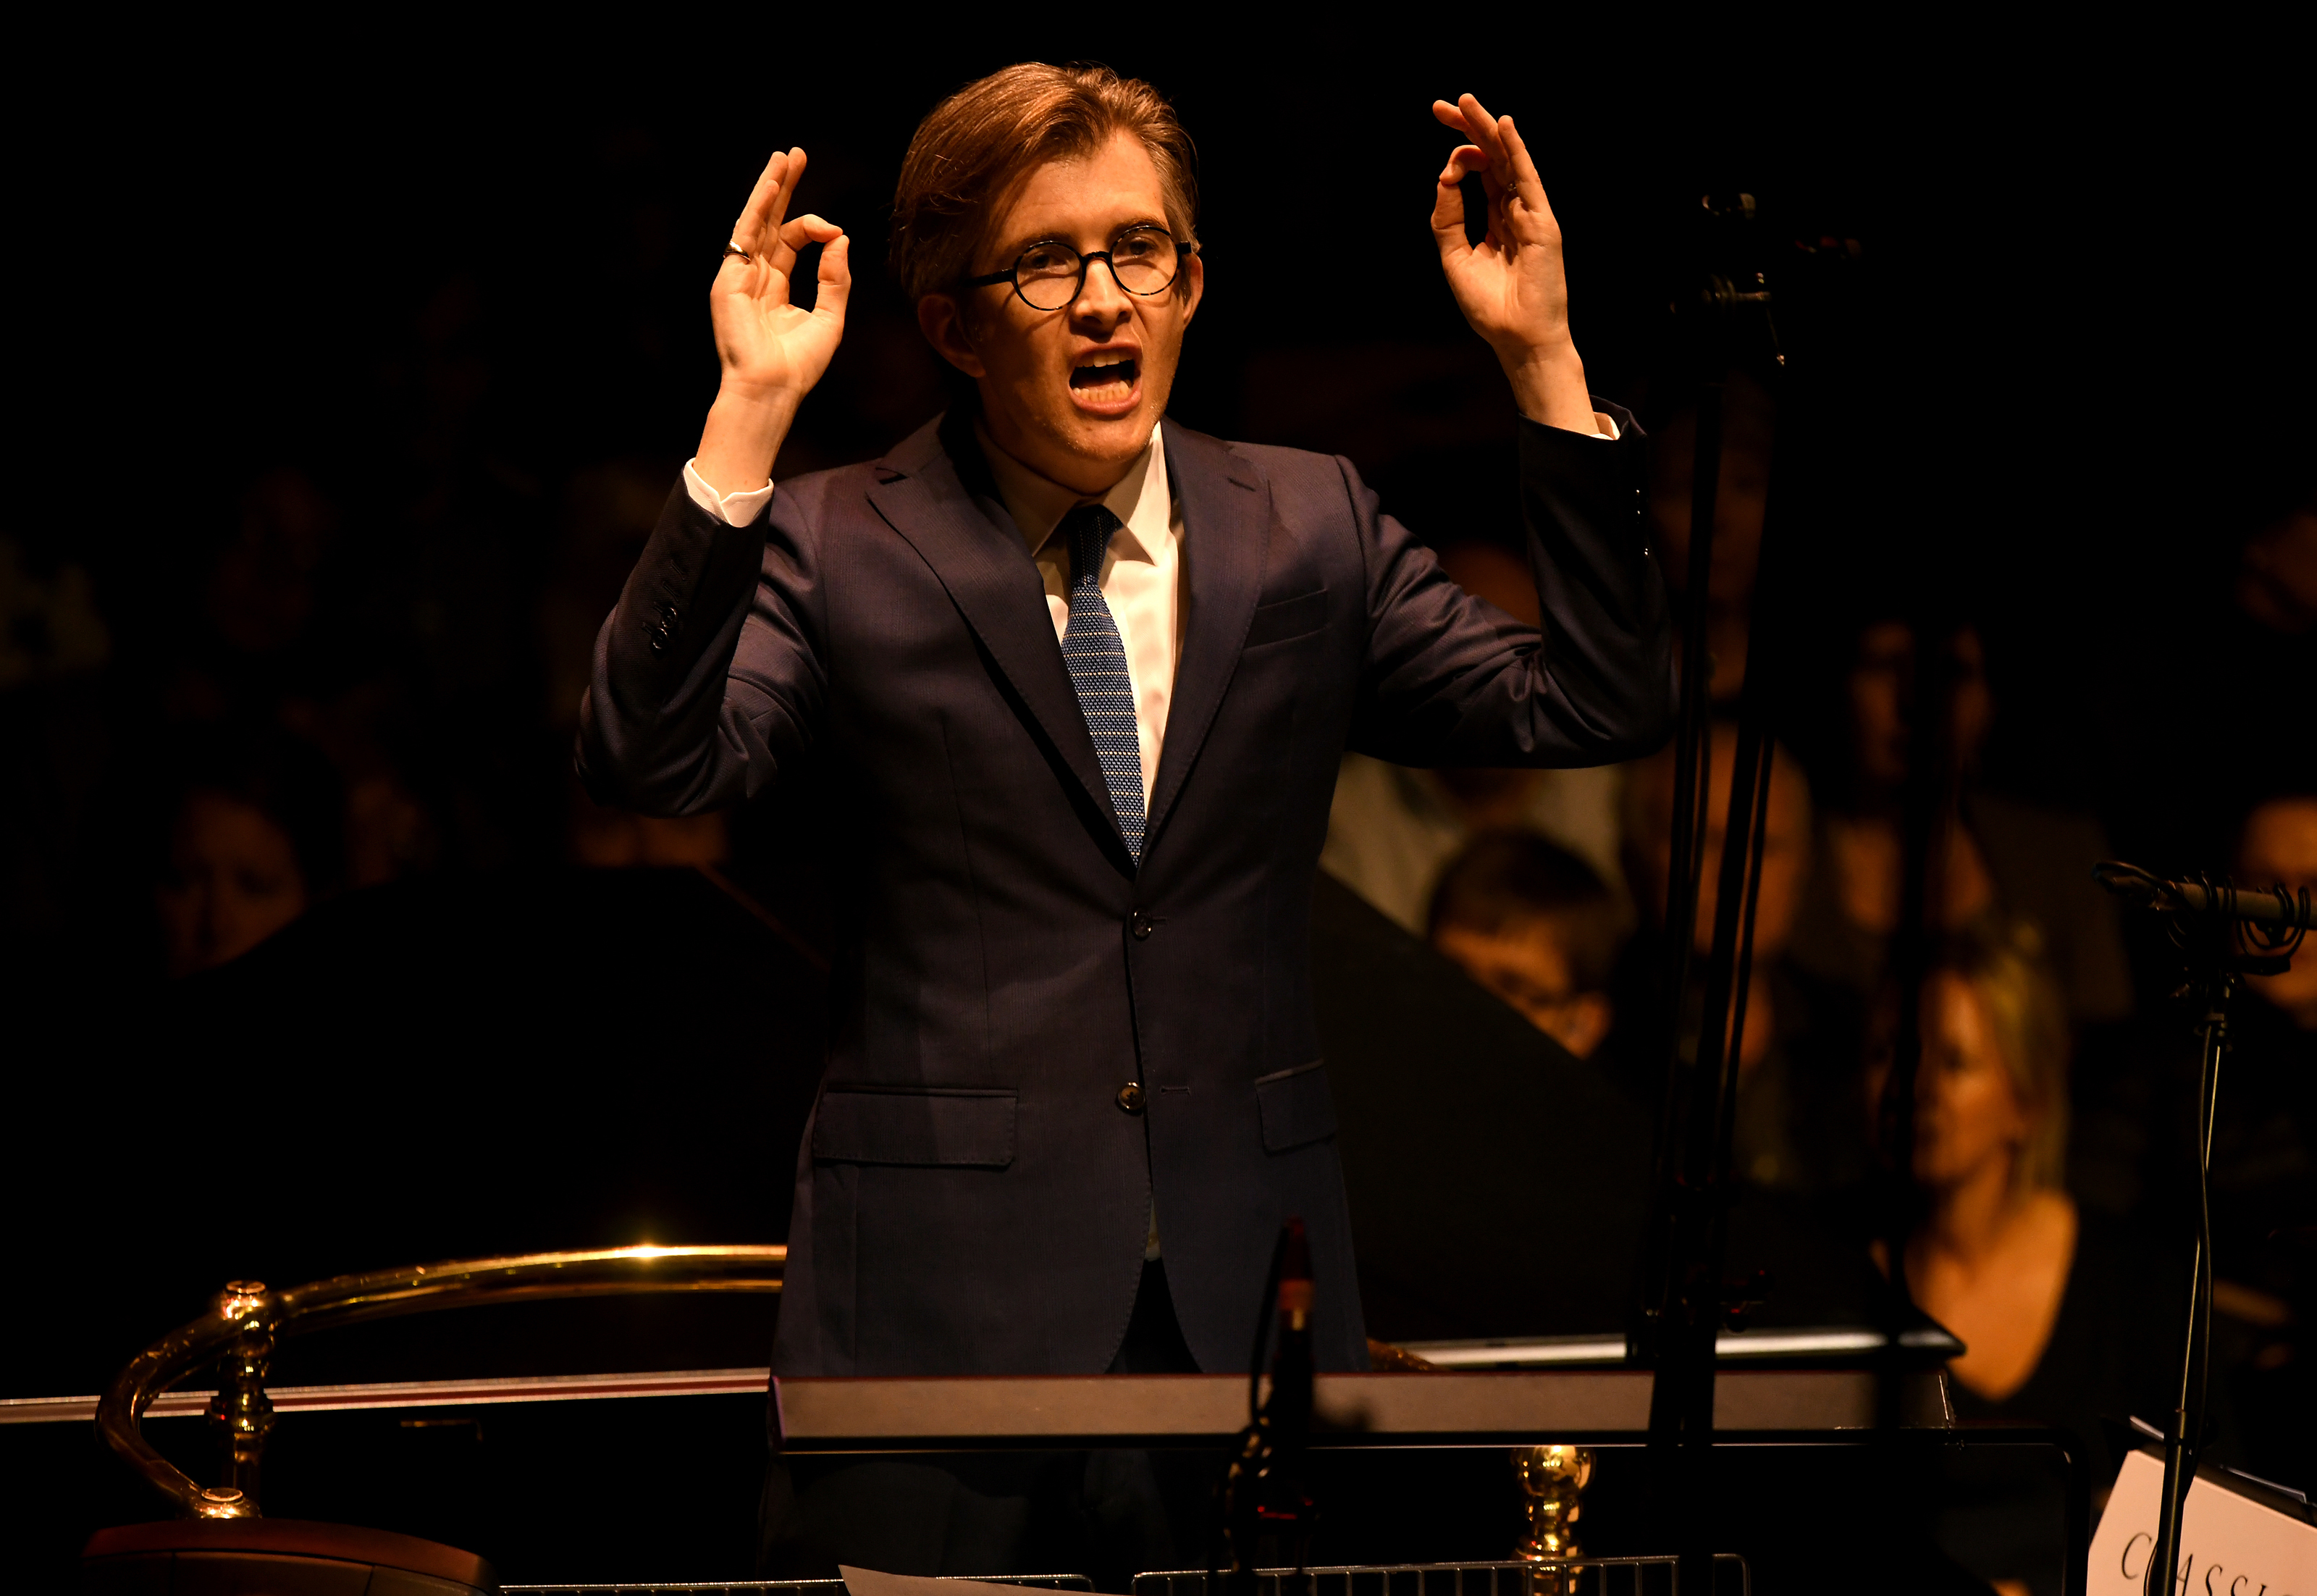 Gareth malone conducting the bournemouth symphony orchestra and chorus at classic fm live at london's royal albert hall